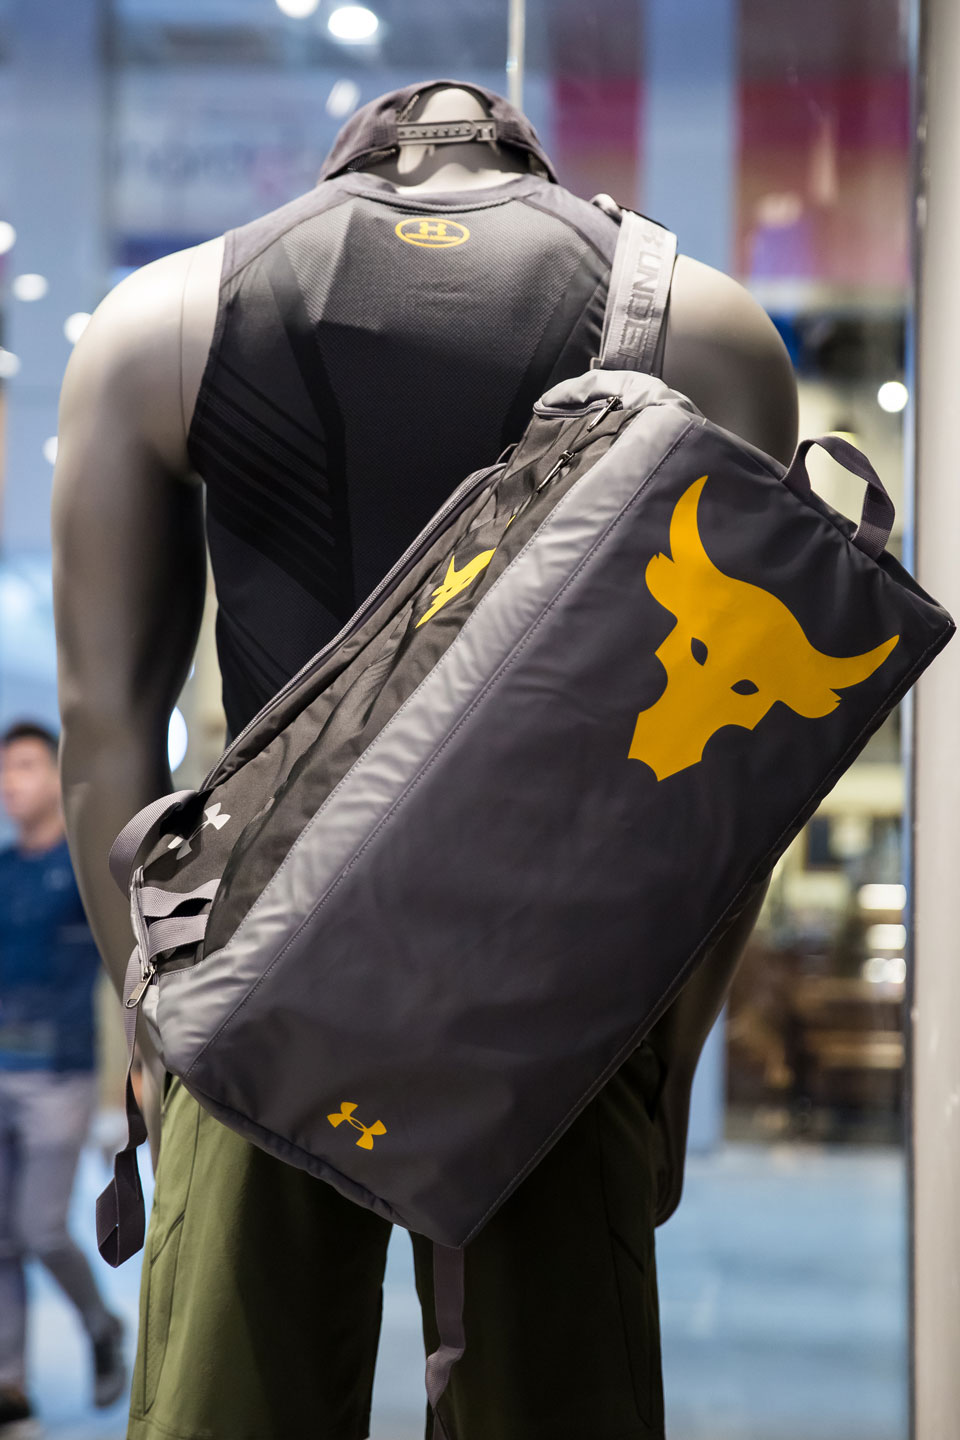 Under Armour’s New Flagship Store is Now Open in Orchard Central